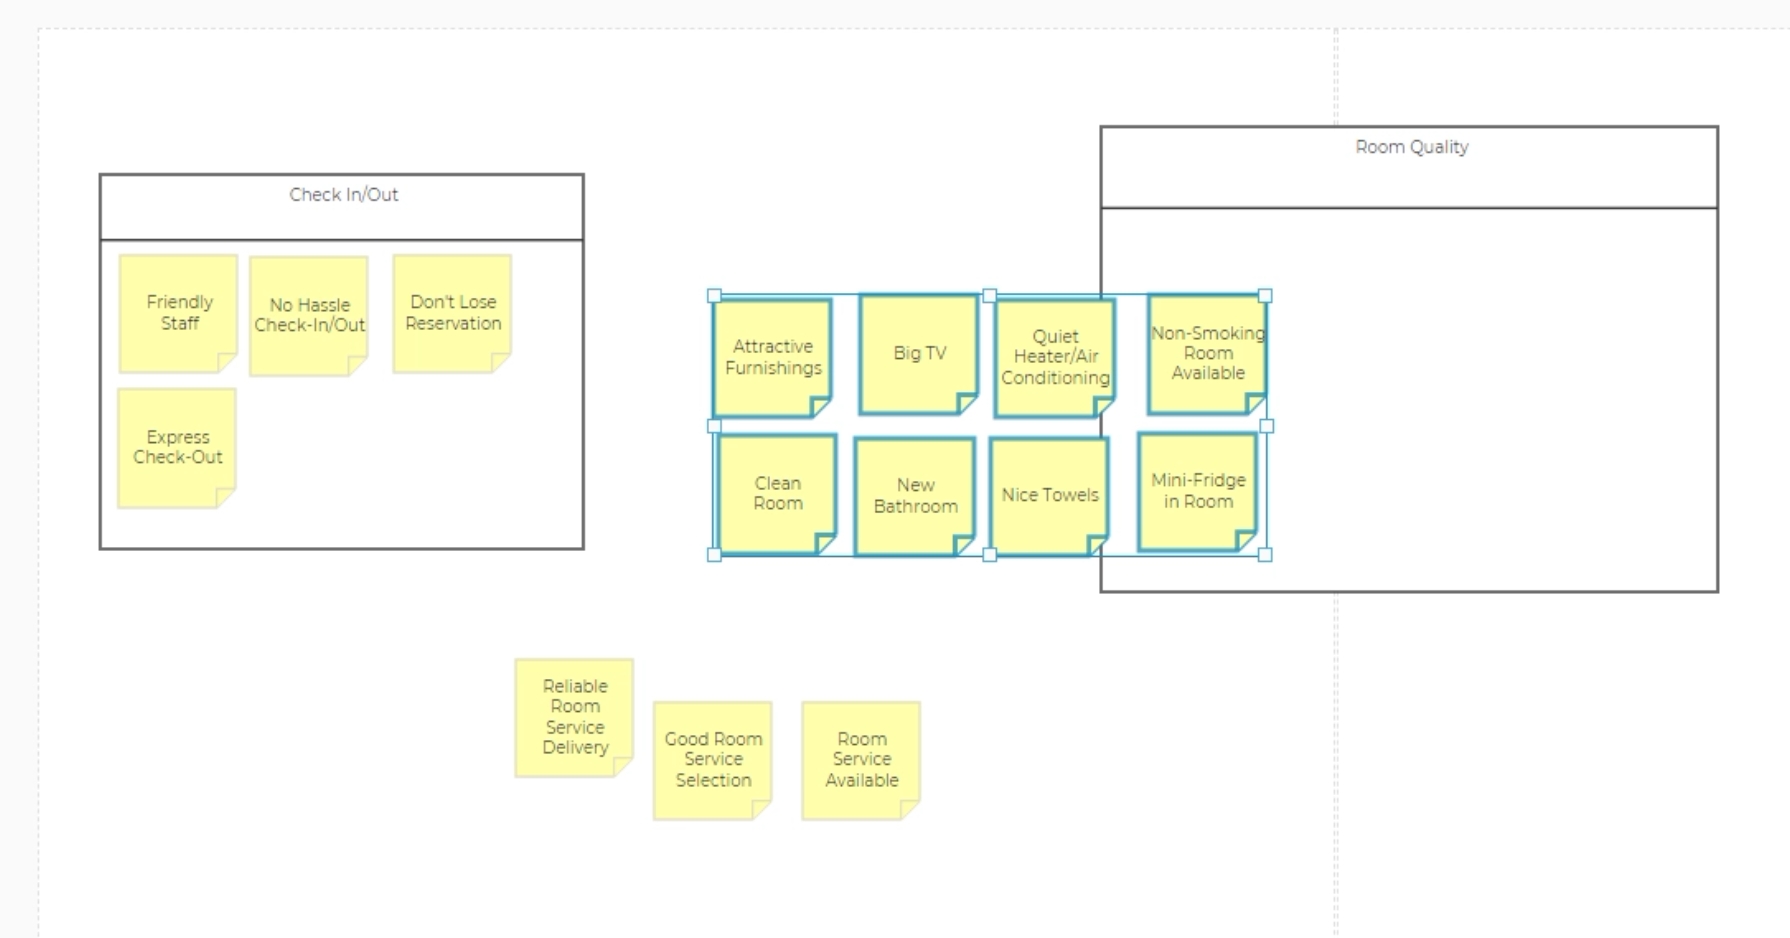 Multiselect notes in Engineroom affinity diagram.